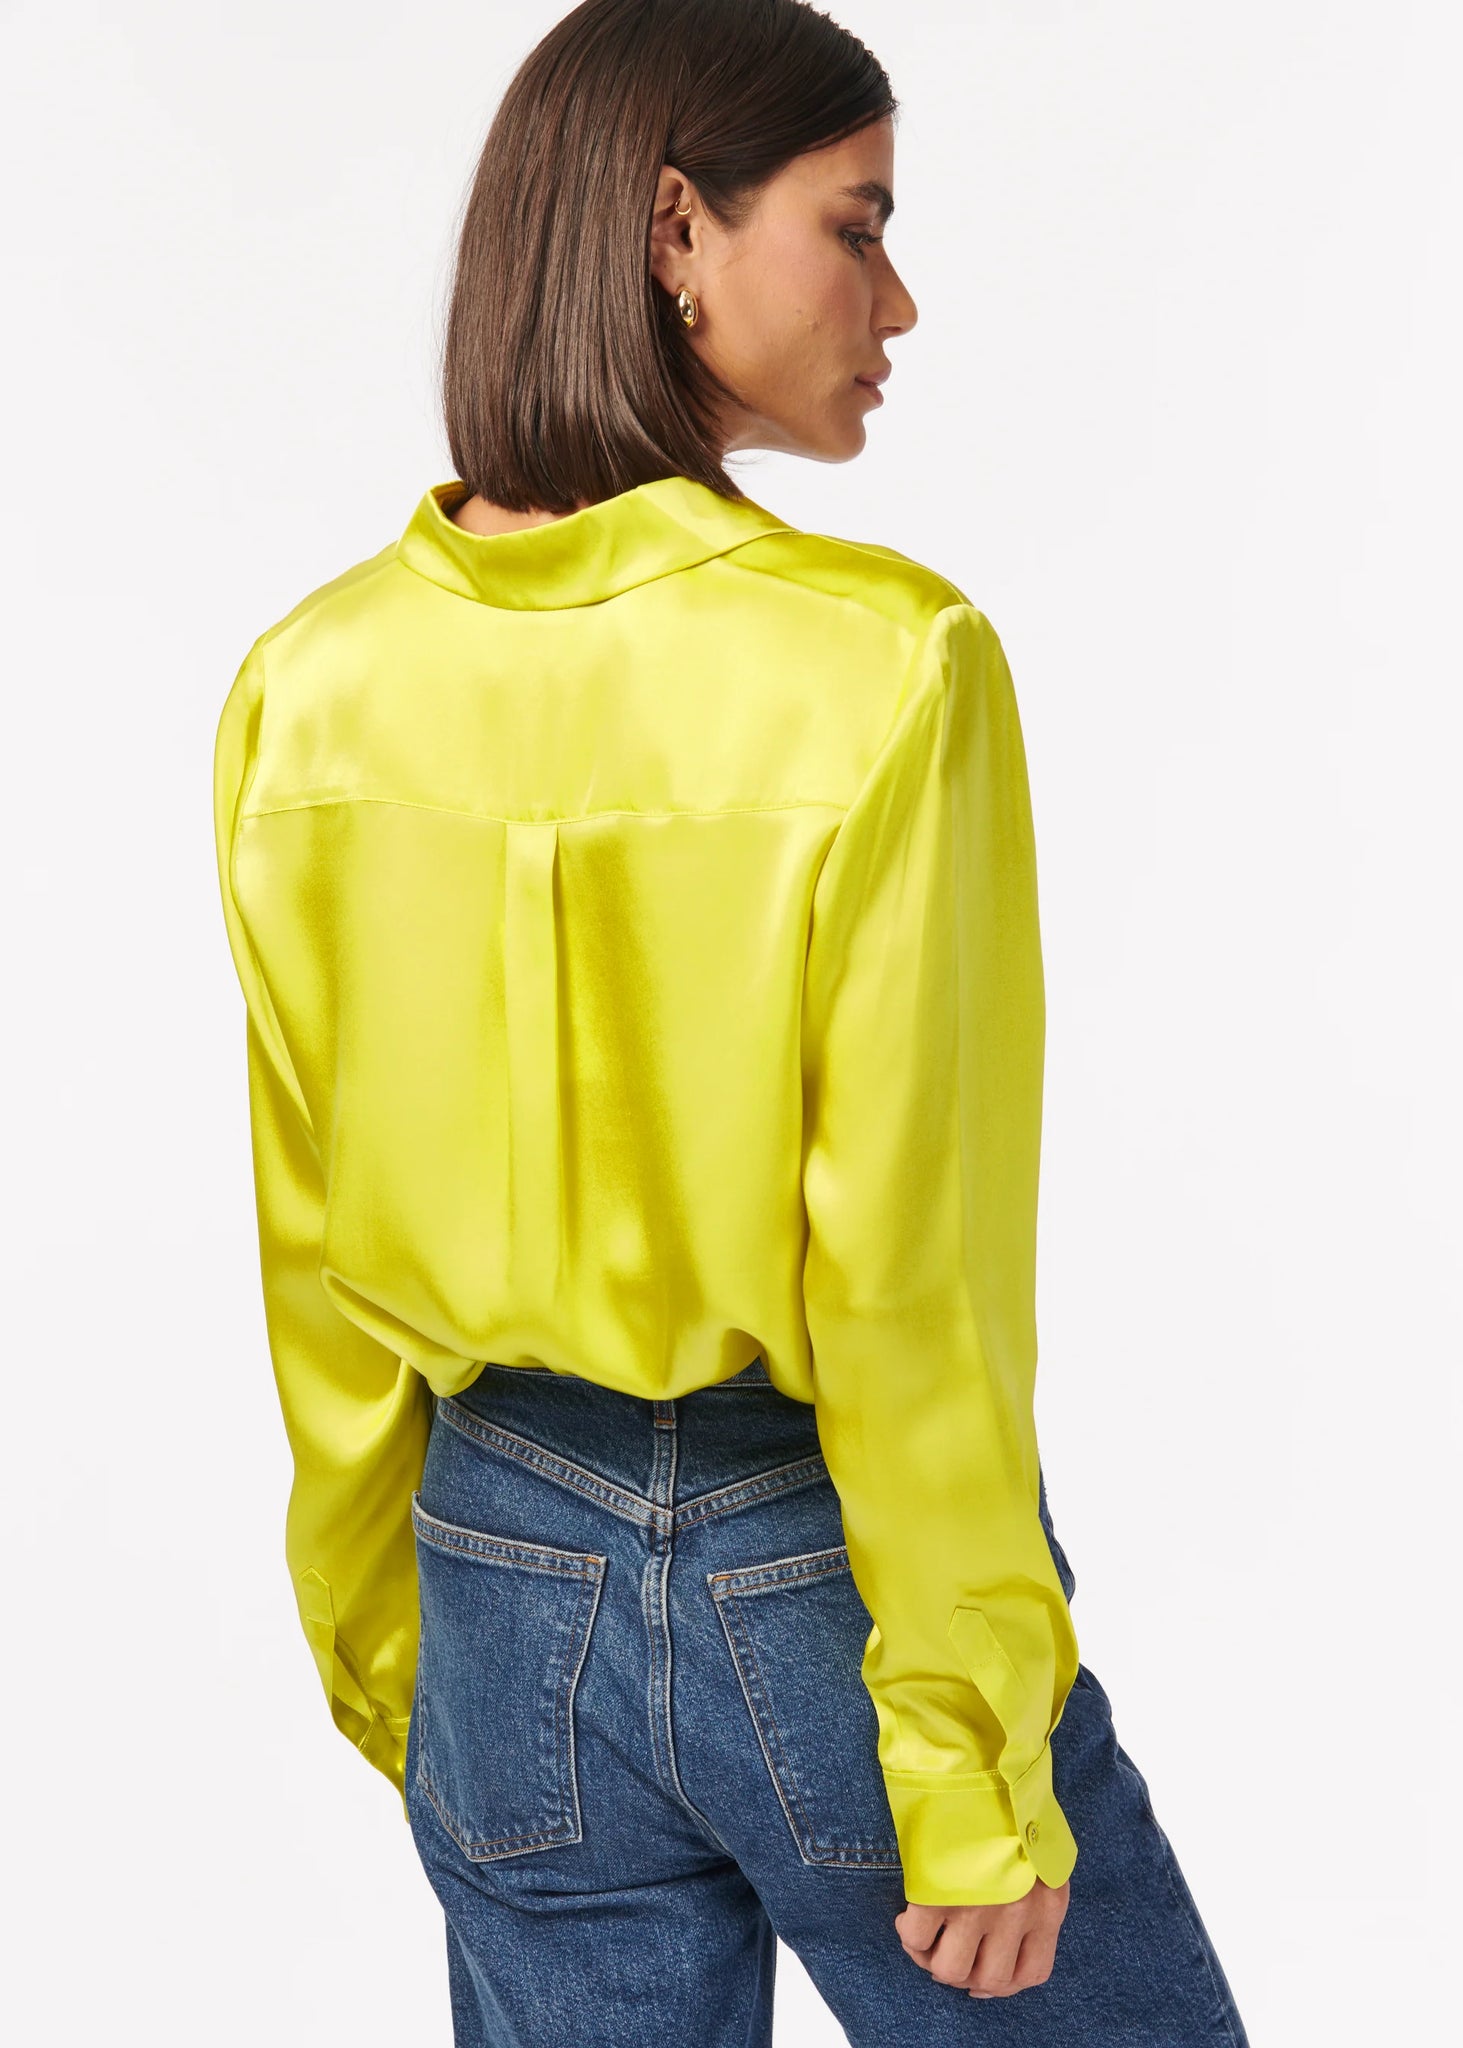 Cami NYC Crosby Blouse - Zest